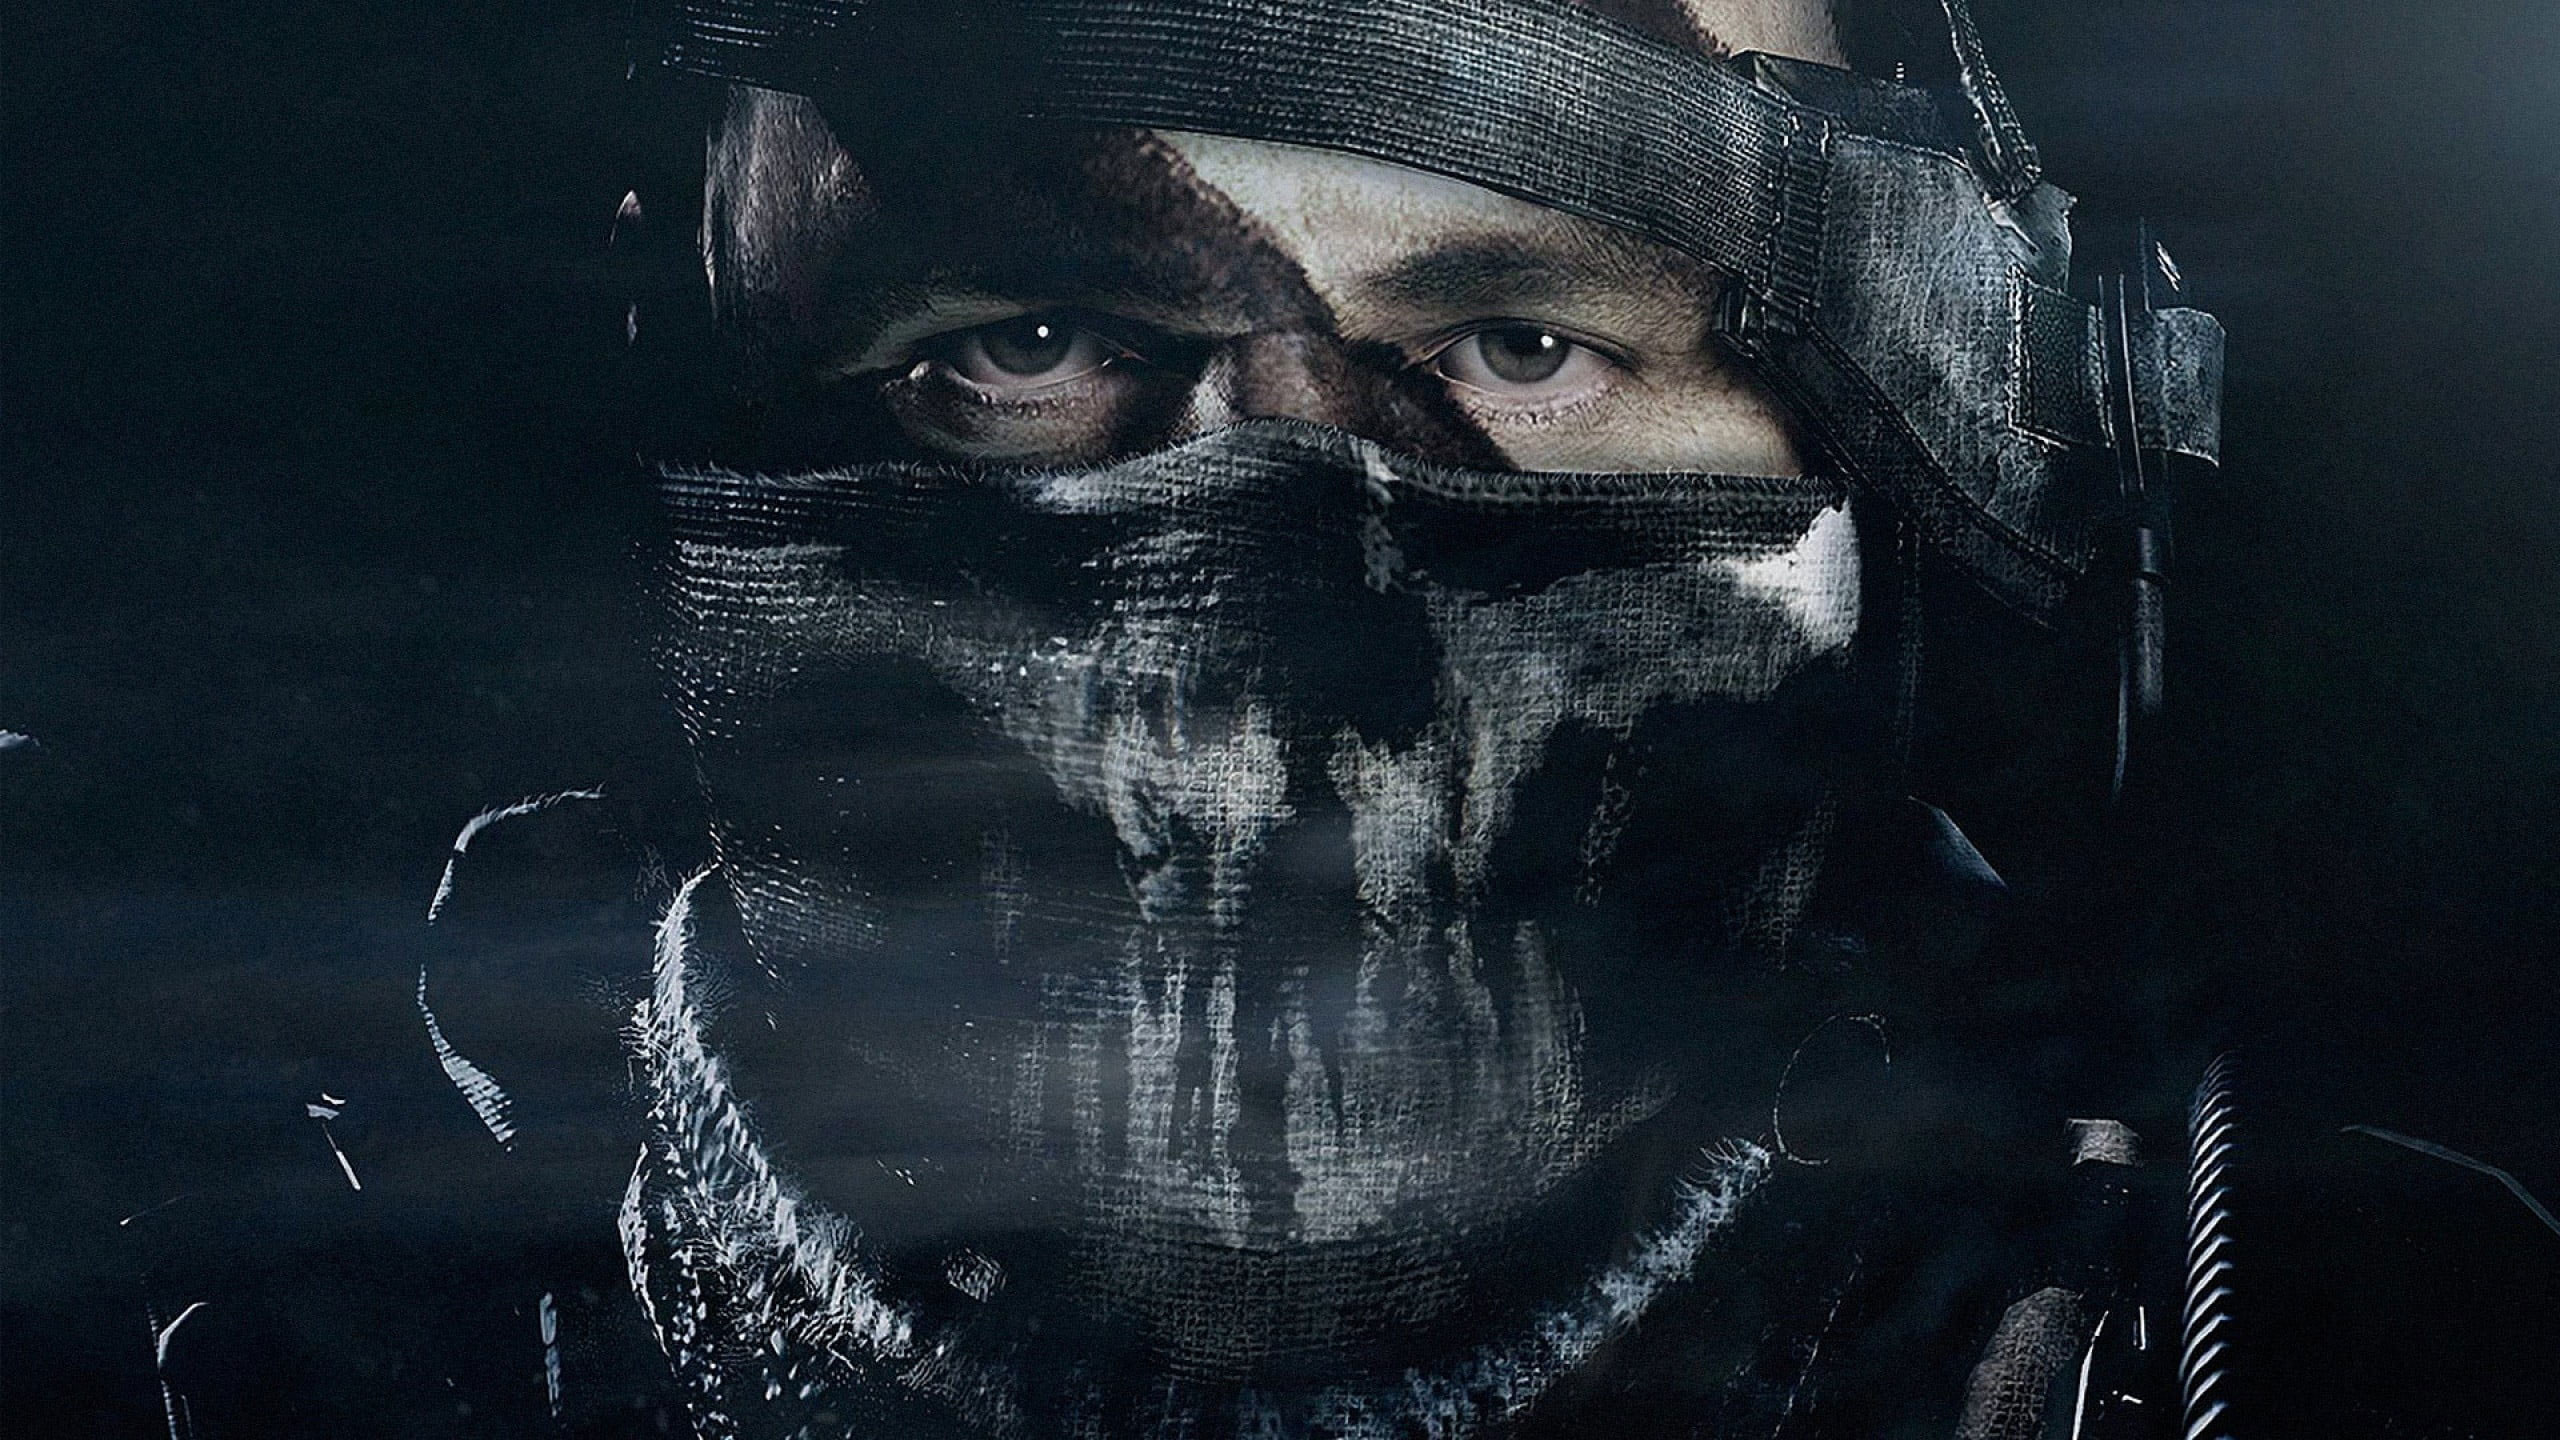 Man Wearing Mask And Armor Wallpaper, COD